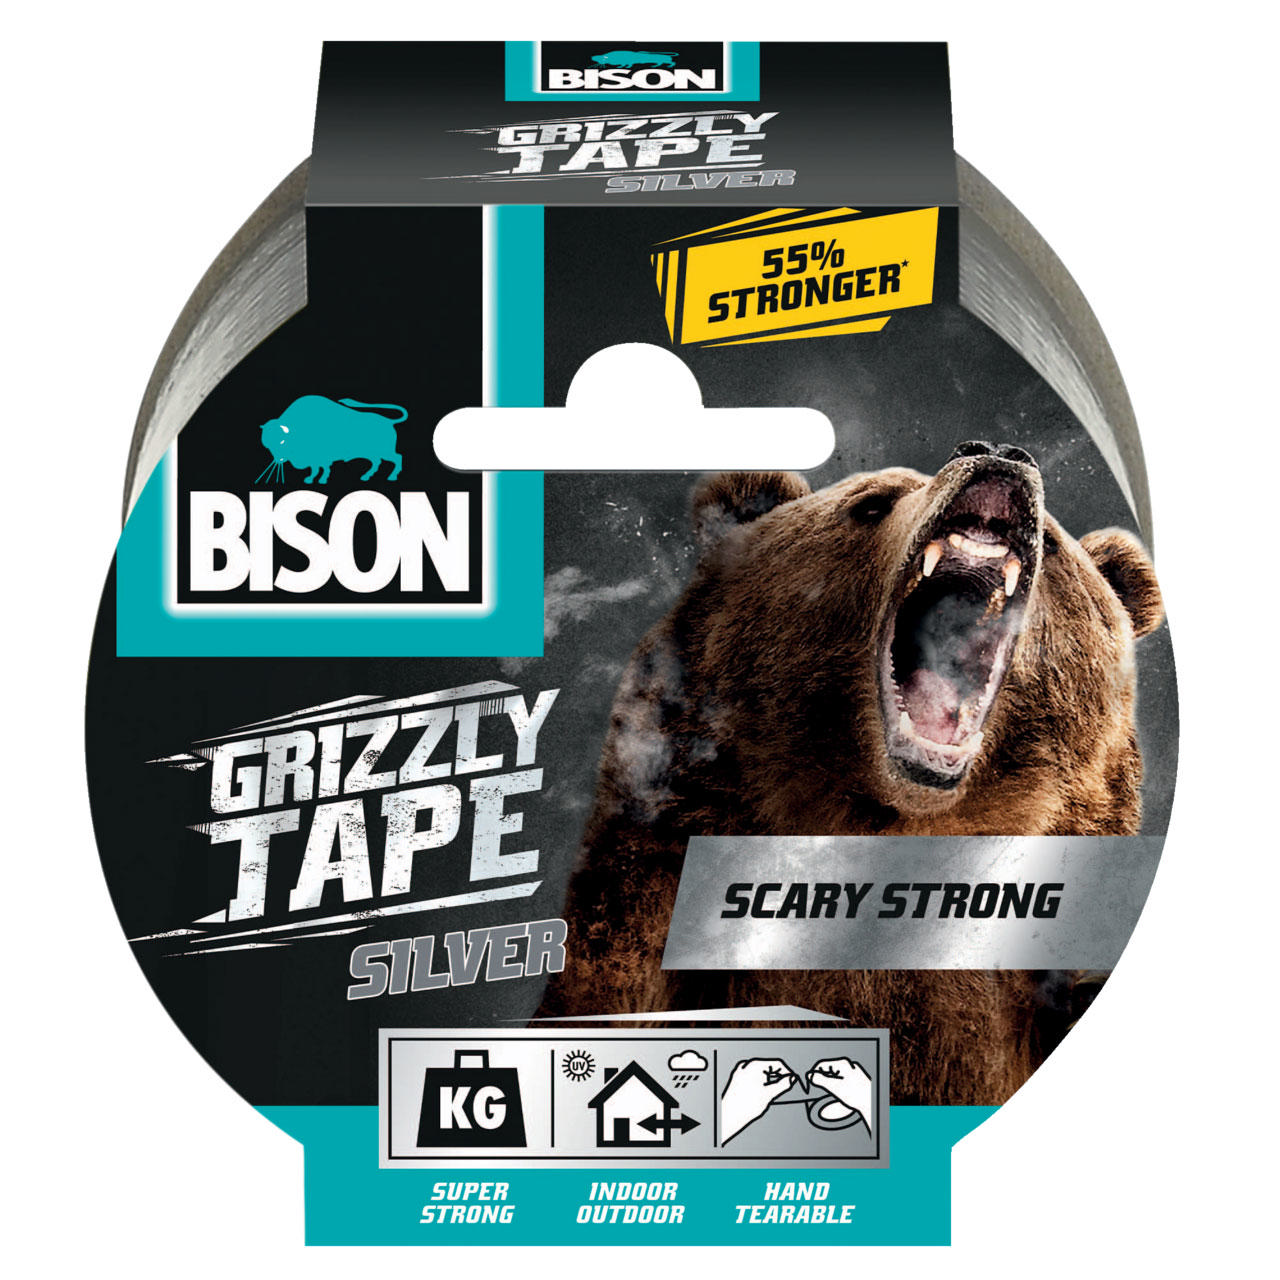 BISON 180103 GRIZZLY TAPE SILVER 10M